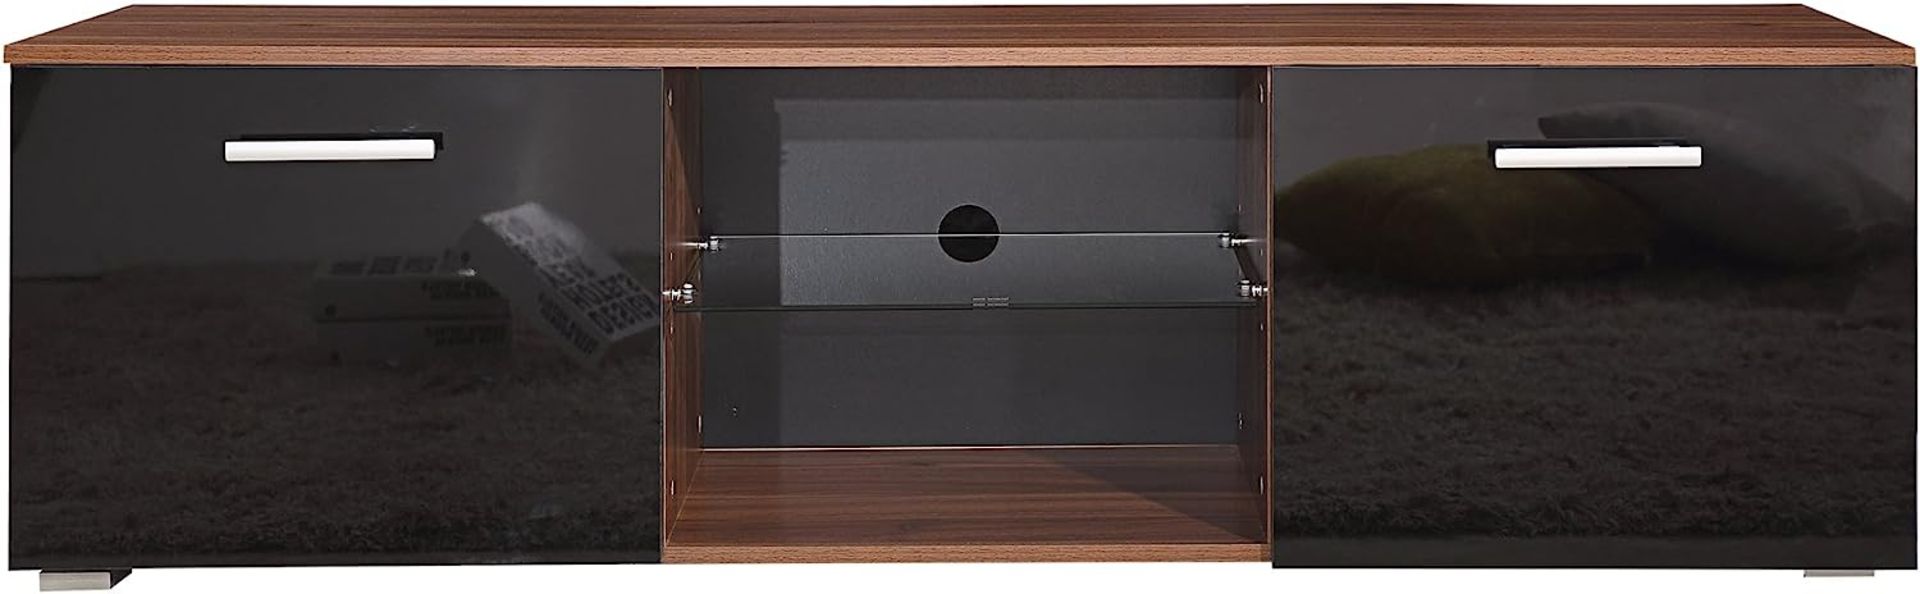 10 X BRAND NEW MODERN 160CM TV STAND CABINET UNIT WITH HIGH GLOSS DOORS (BLACK ON WALNUT) - Image 4 of 9